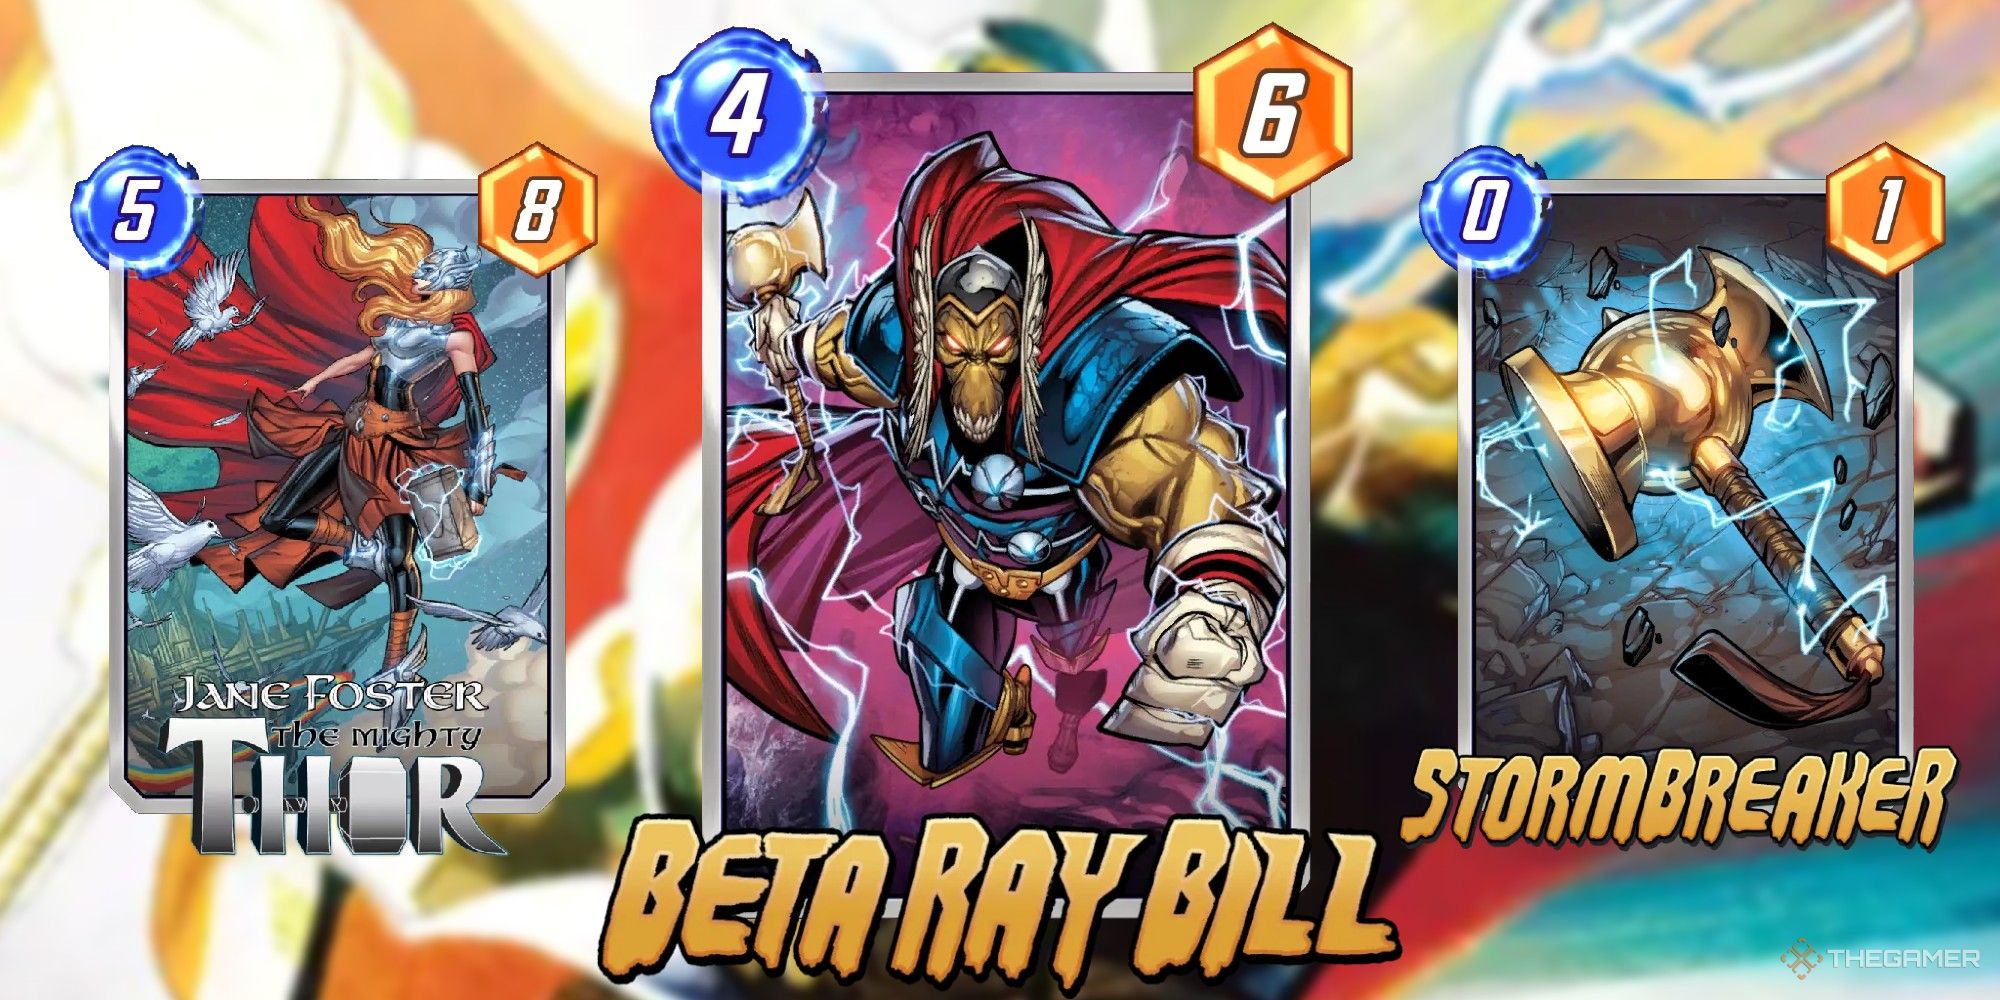 Marvel Snap Cards Jane Foster, Beta Ray Bill and Stormbreaker